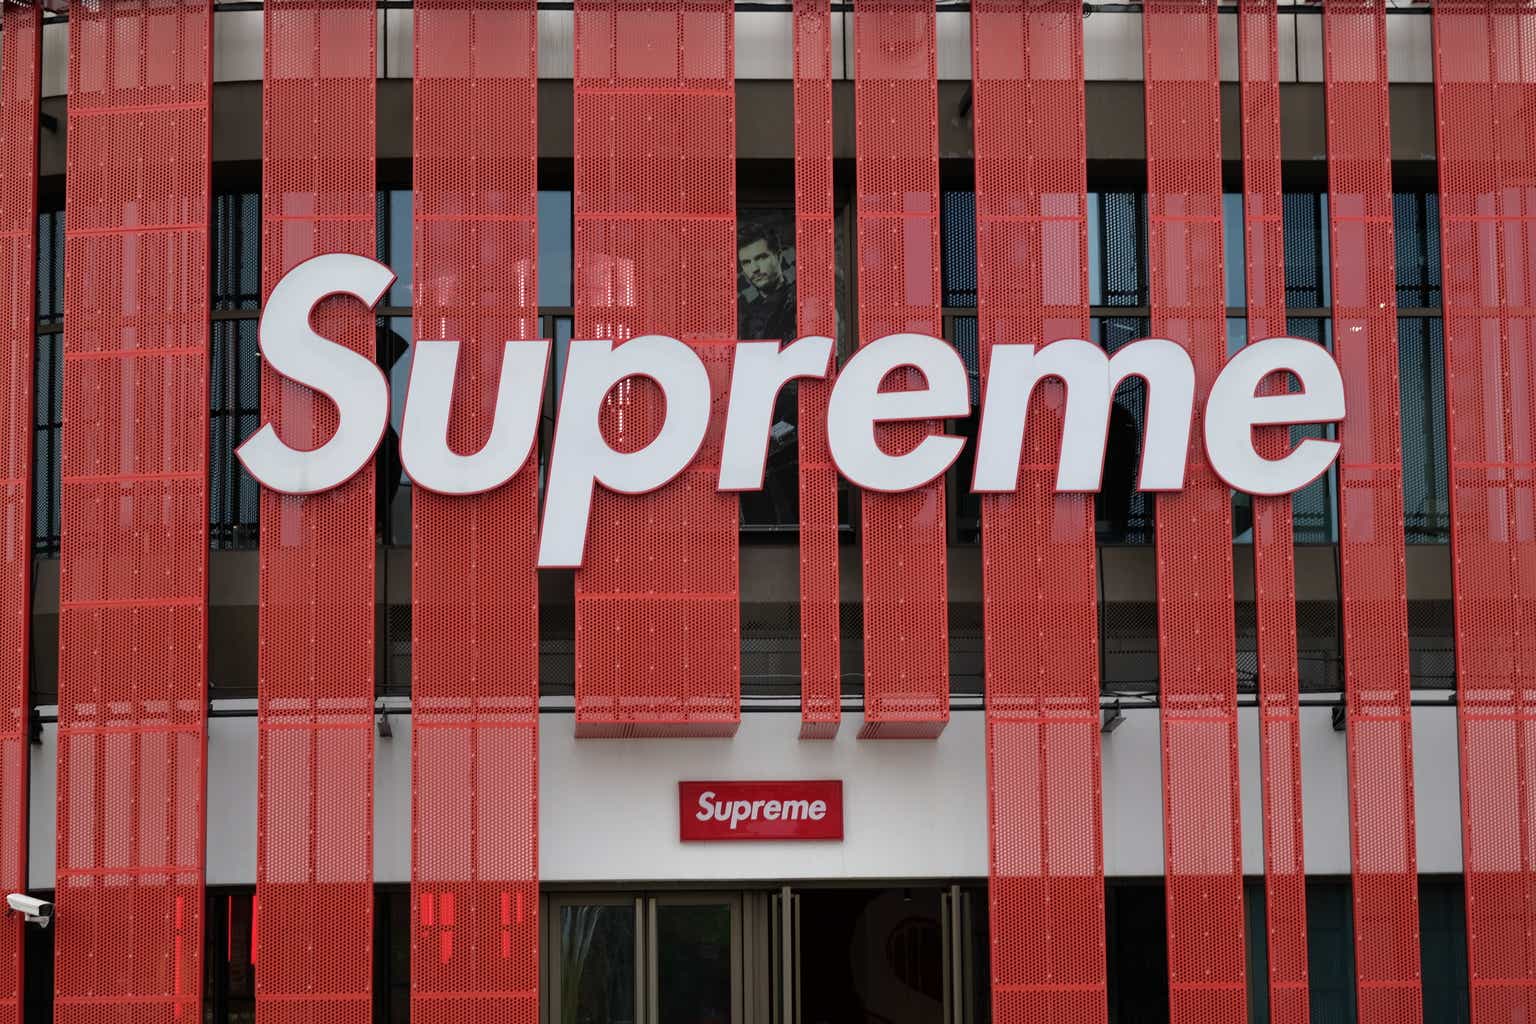 Why Supreme Sold to VF Corporation